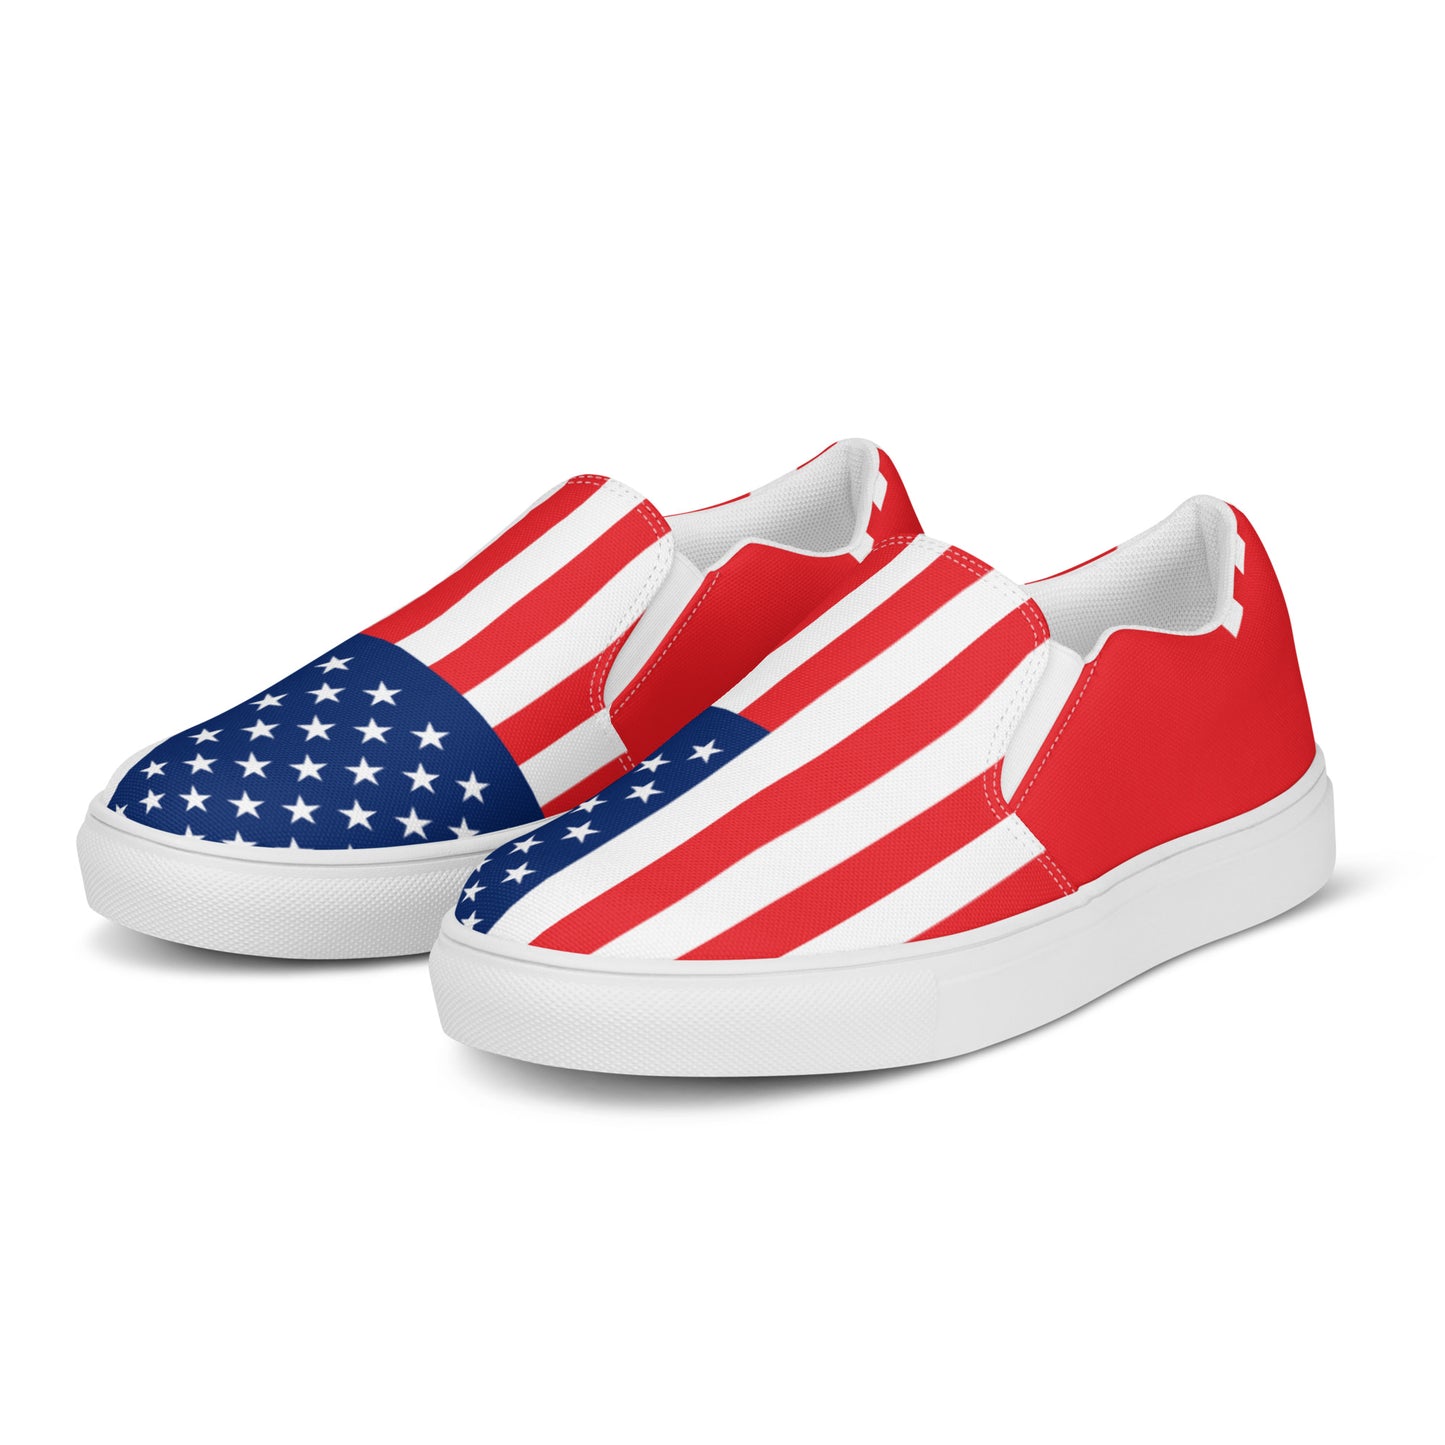 U.S.A Flag - Sustainably Made Women’s slip-on canvas shoes